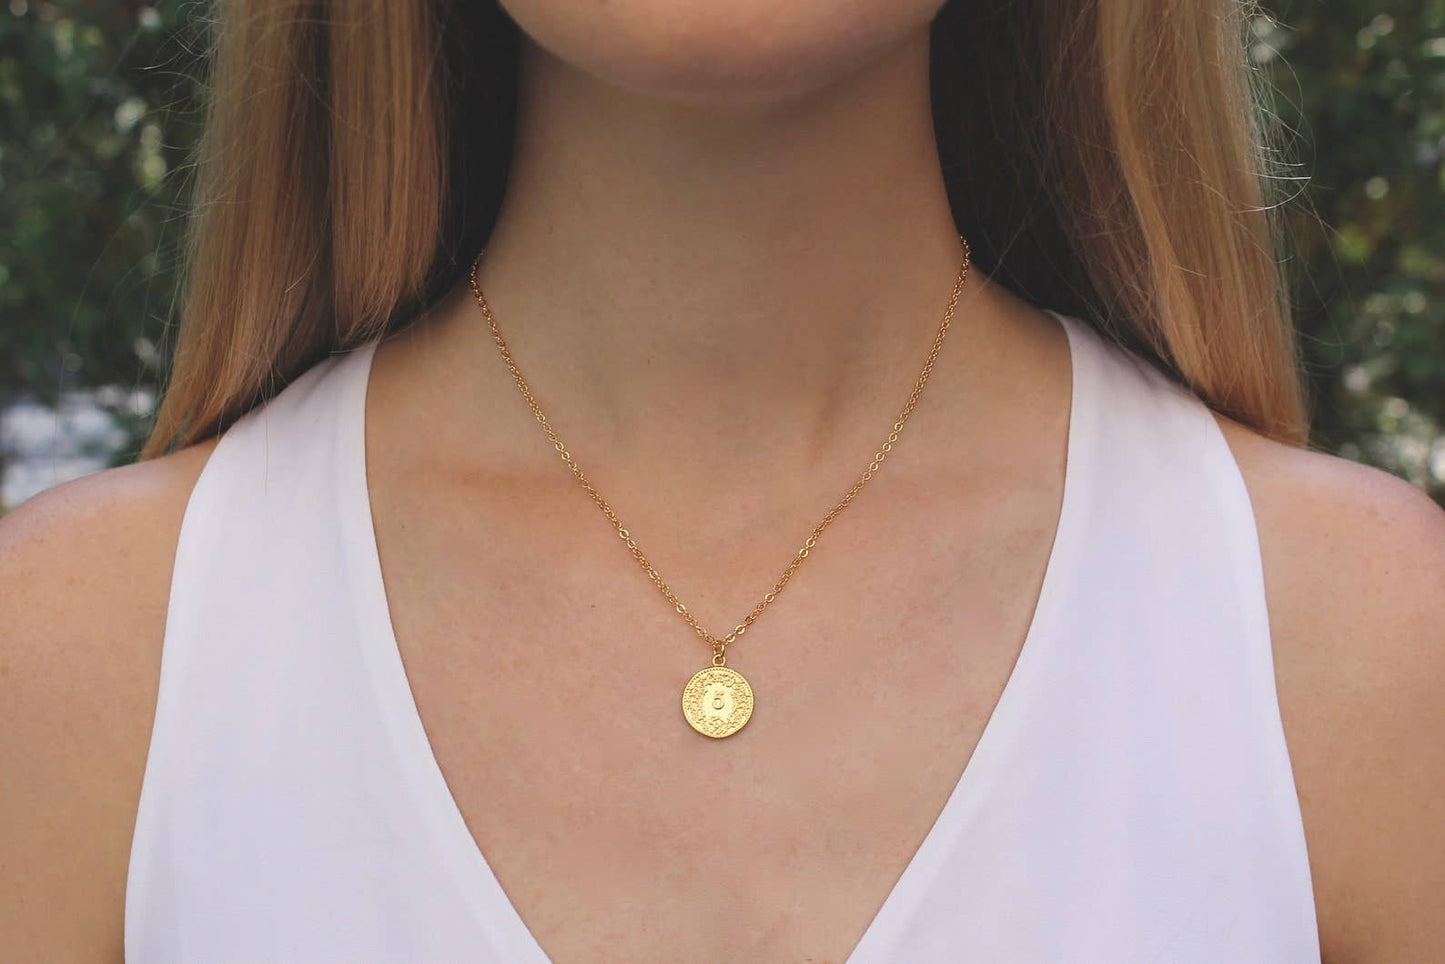 Swiss Coin Necklace